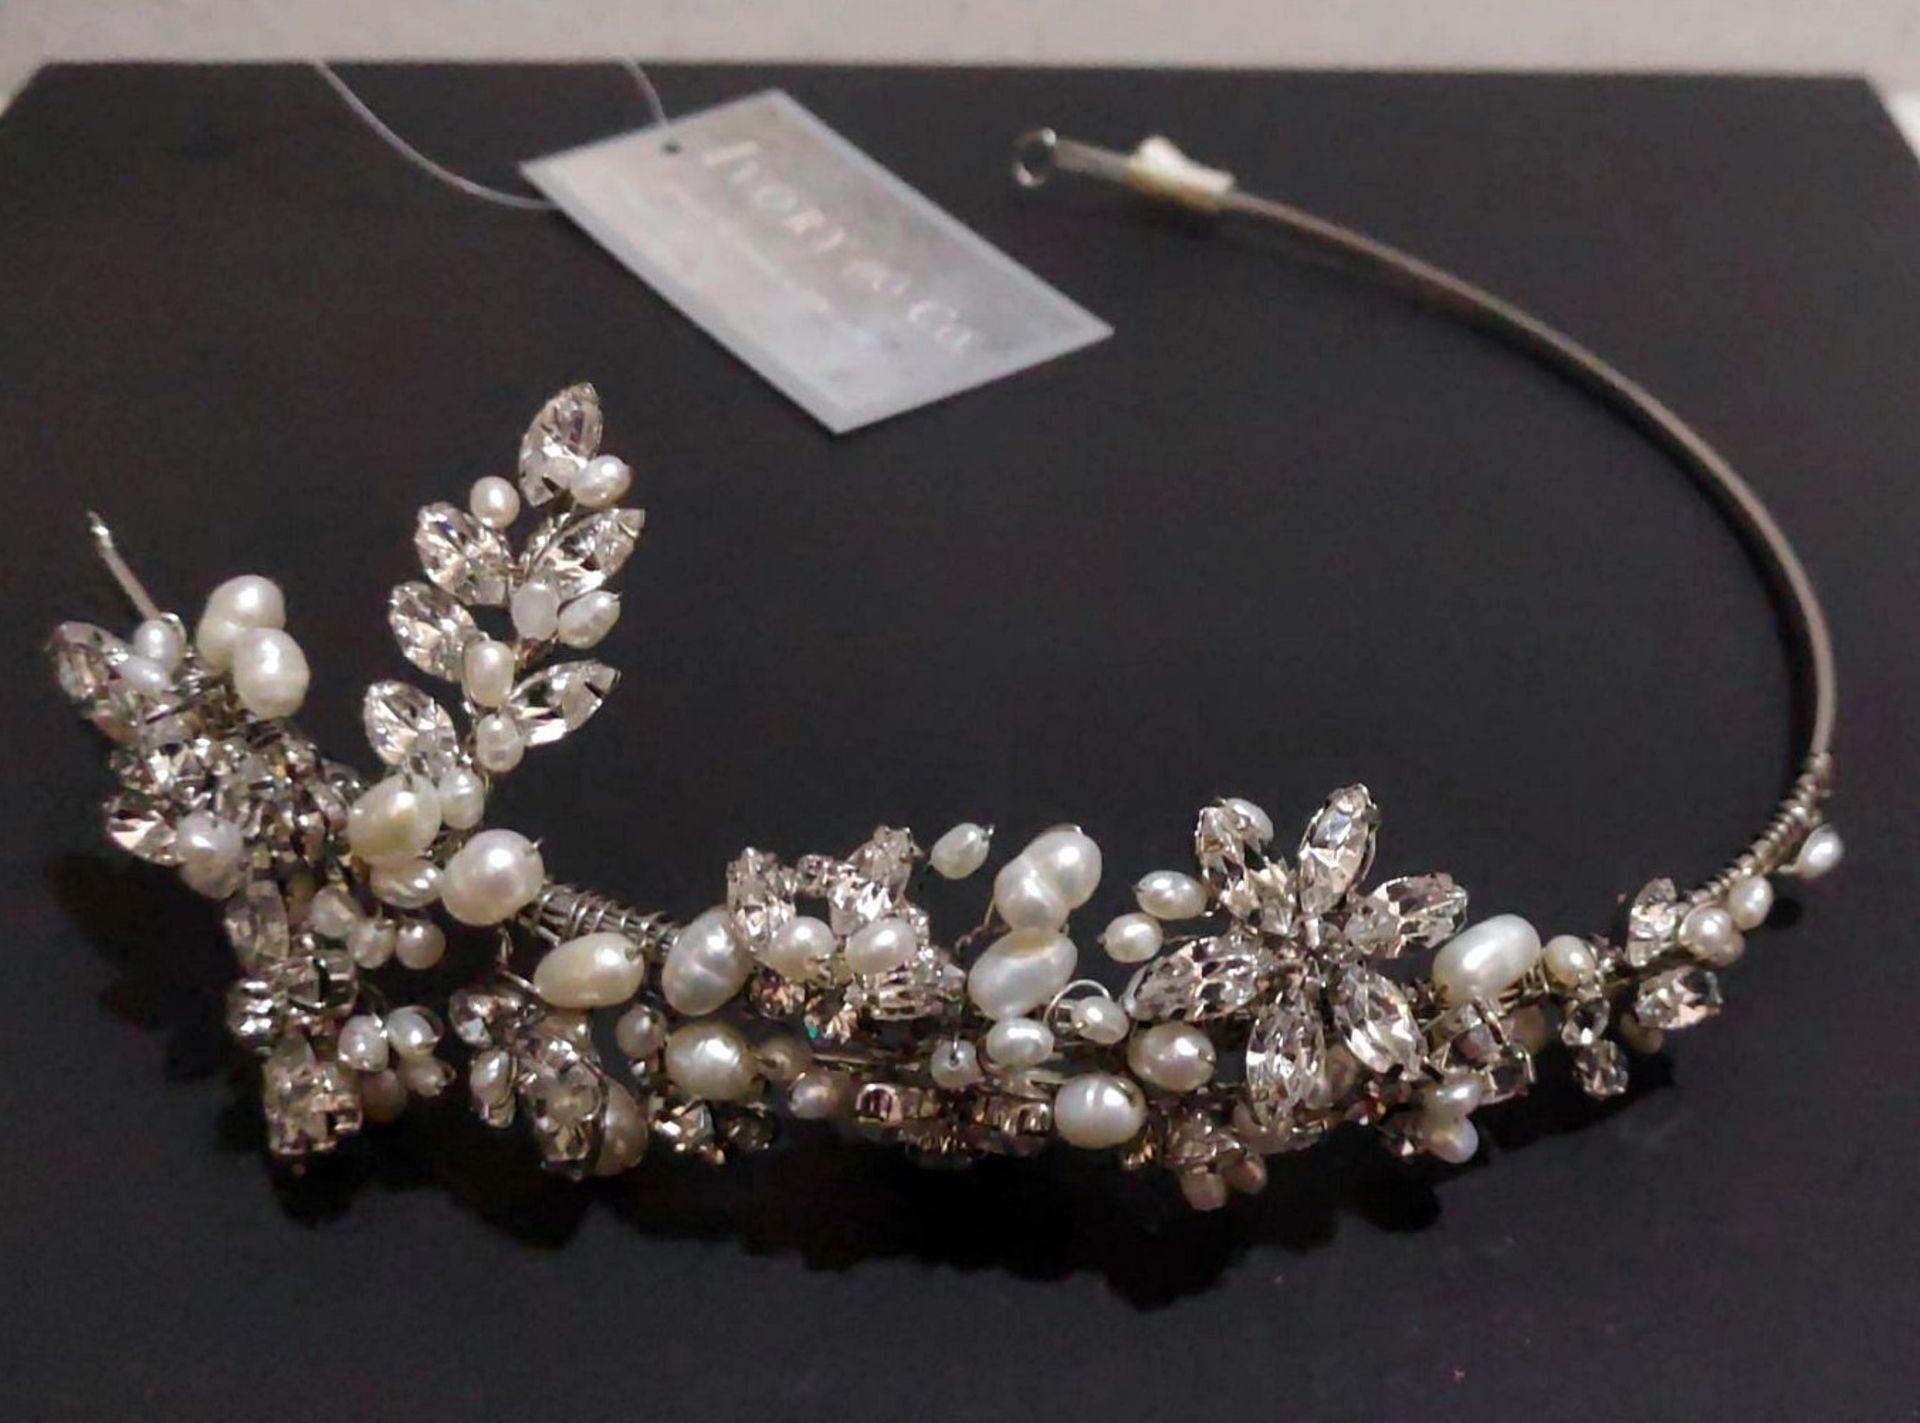 1 x Ivory & Co 'DIOR' Bridal Headpiece Wedding Tiara Featuring A Dazzling Rhodium Crystal And Pearl - Image 8 of 12